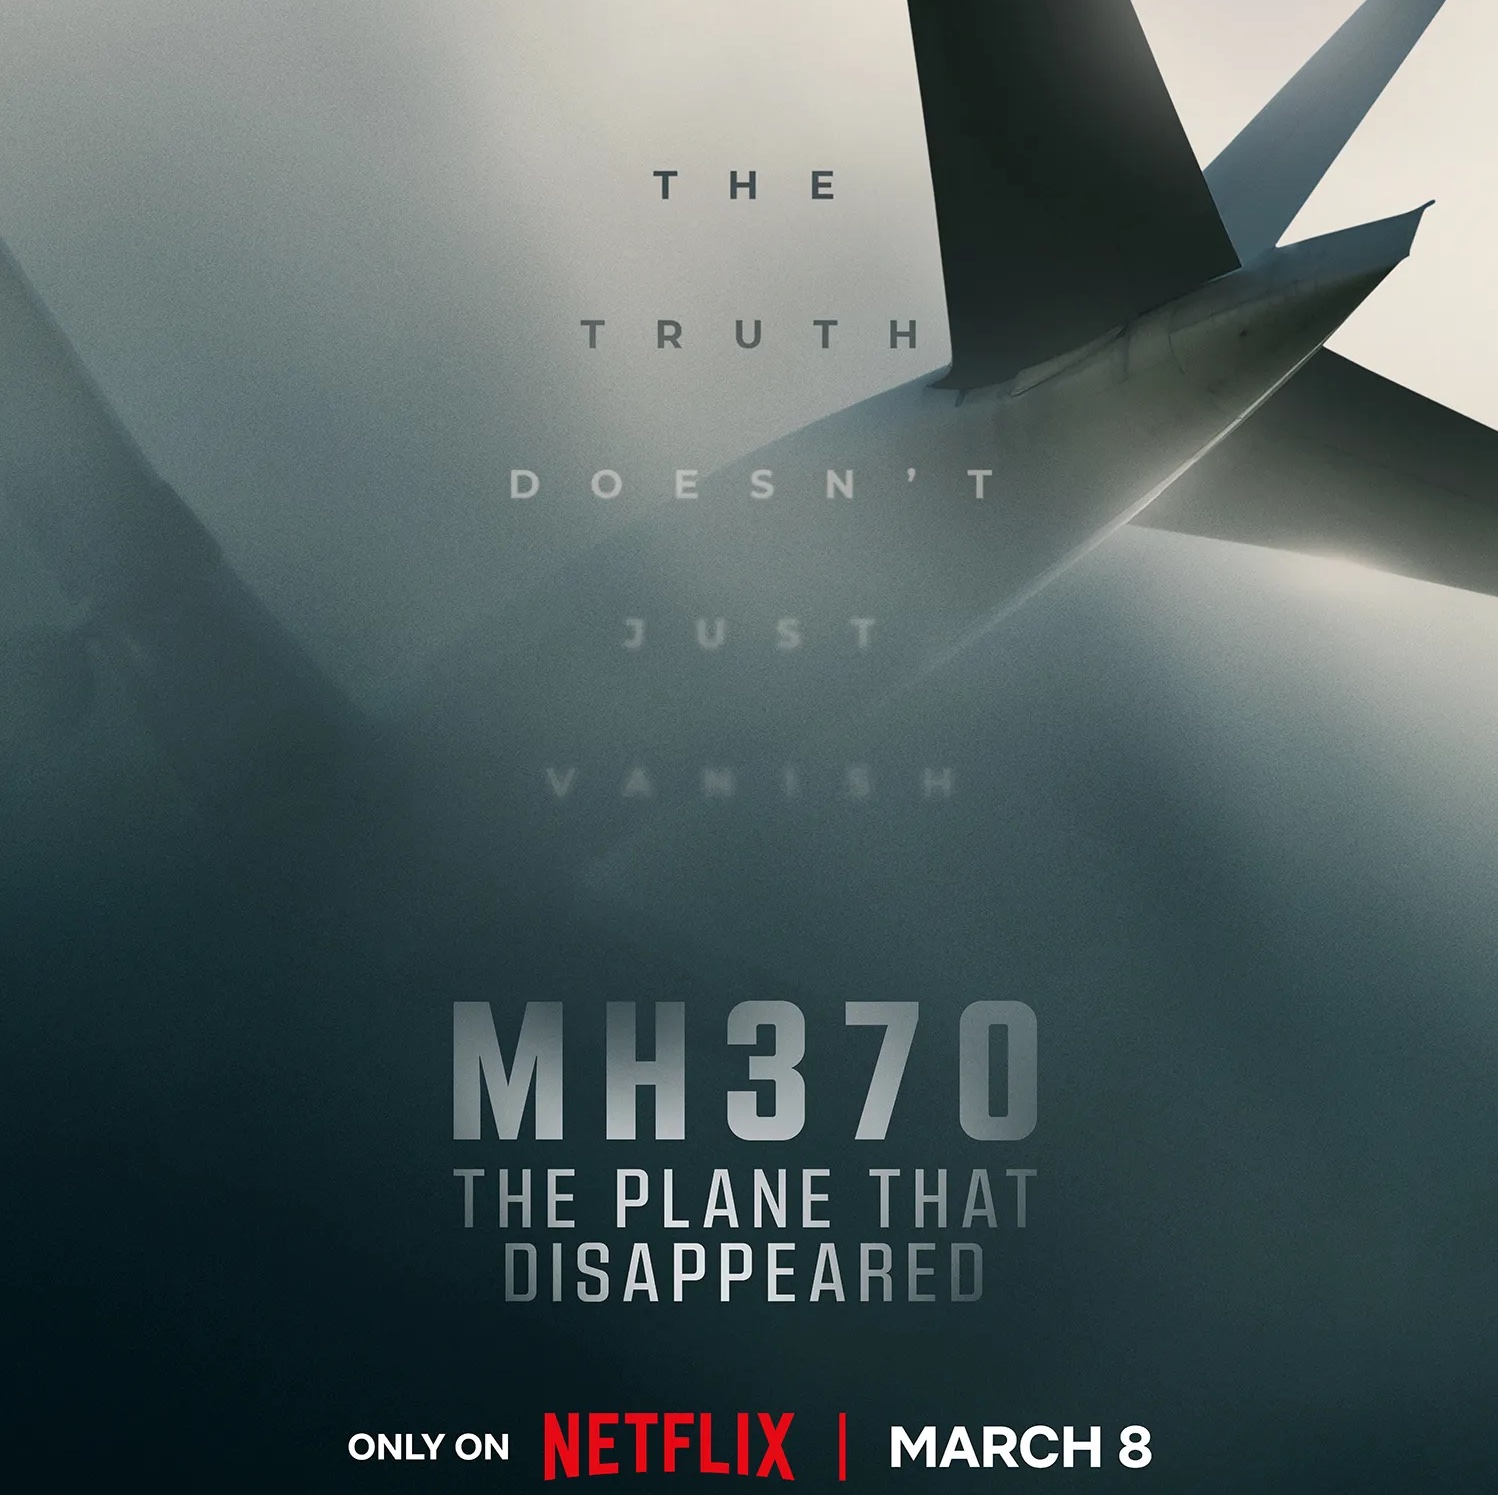 'MH370 The Plane That Disappeared' Released on Netflix Air Edel